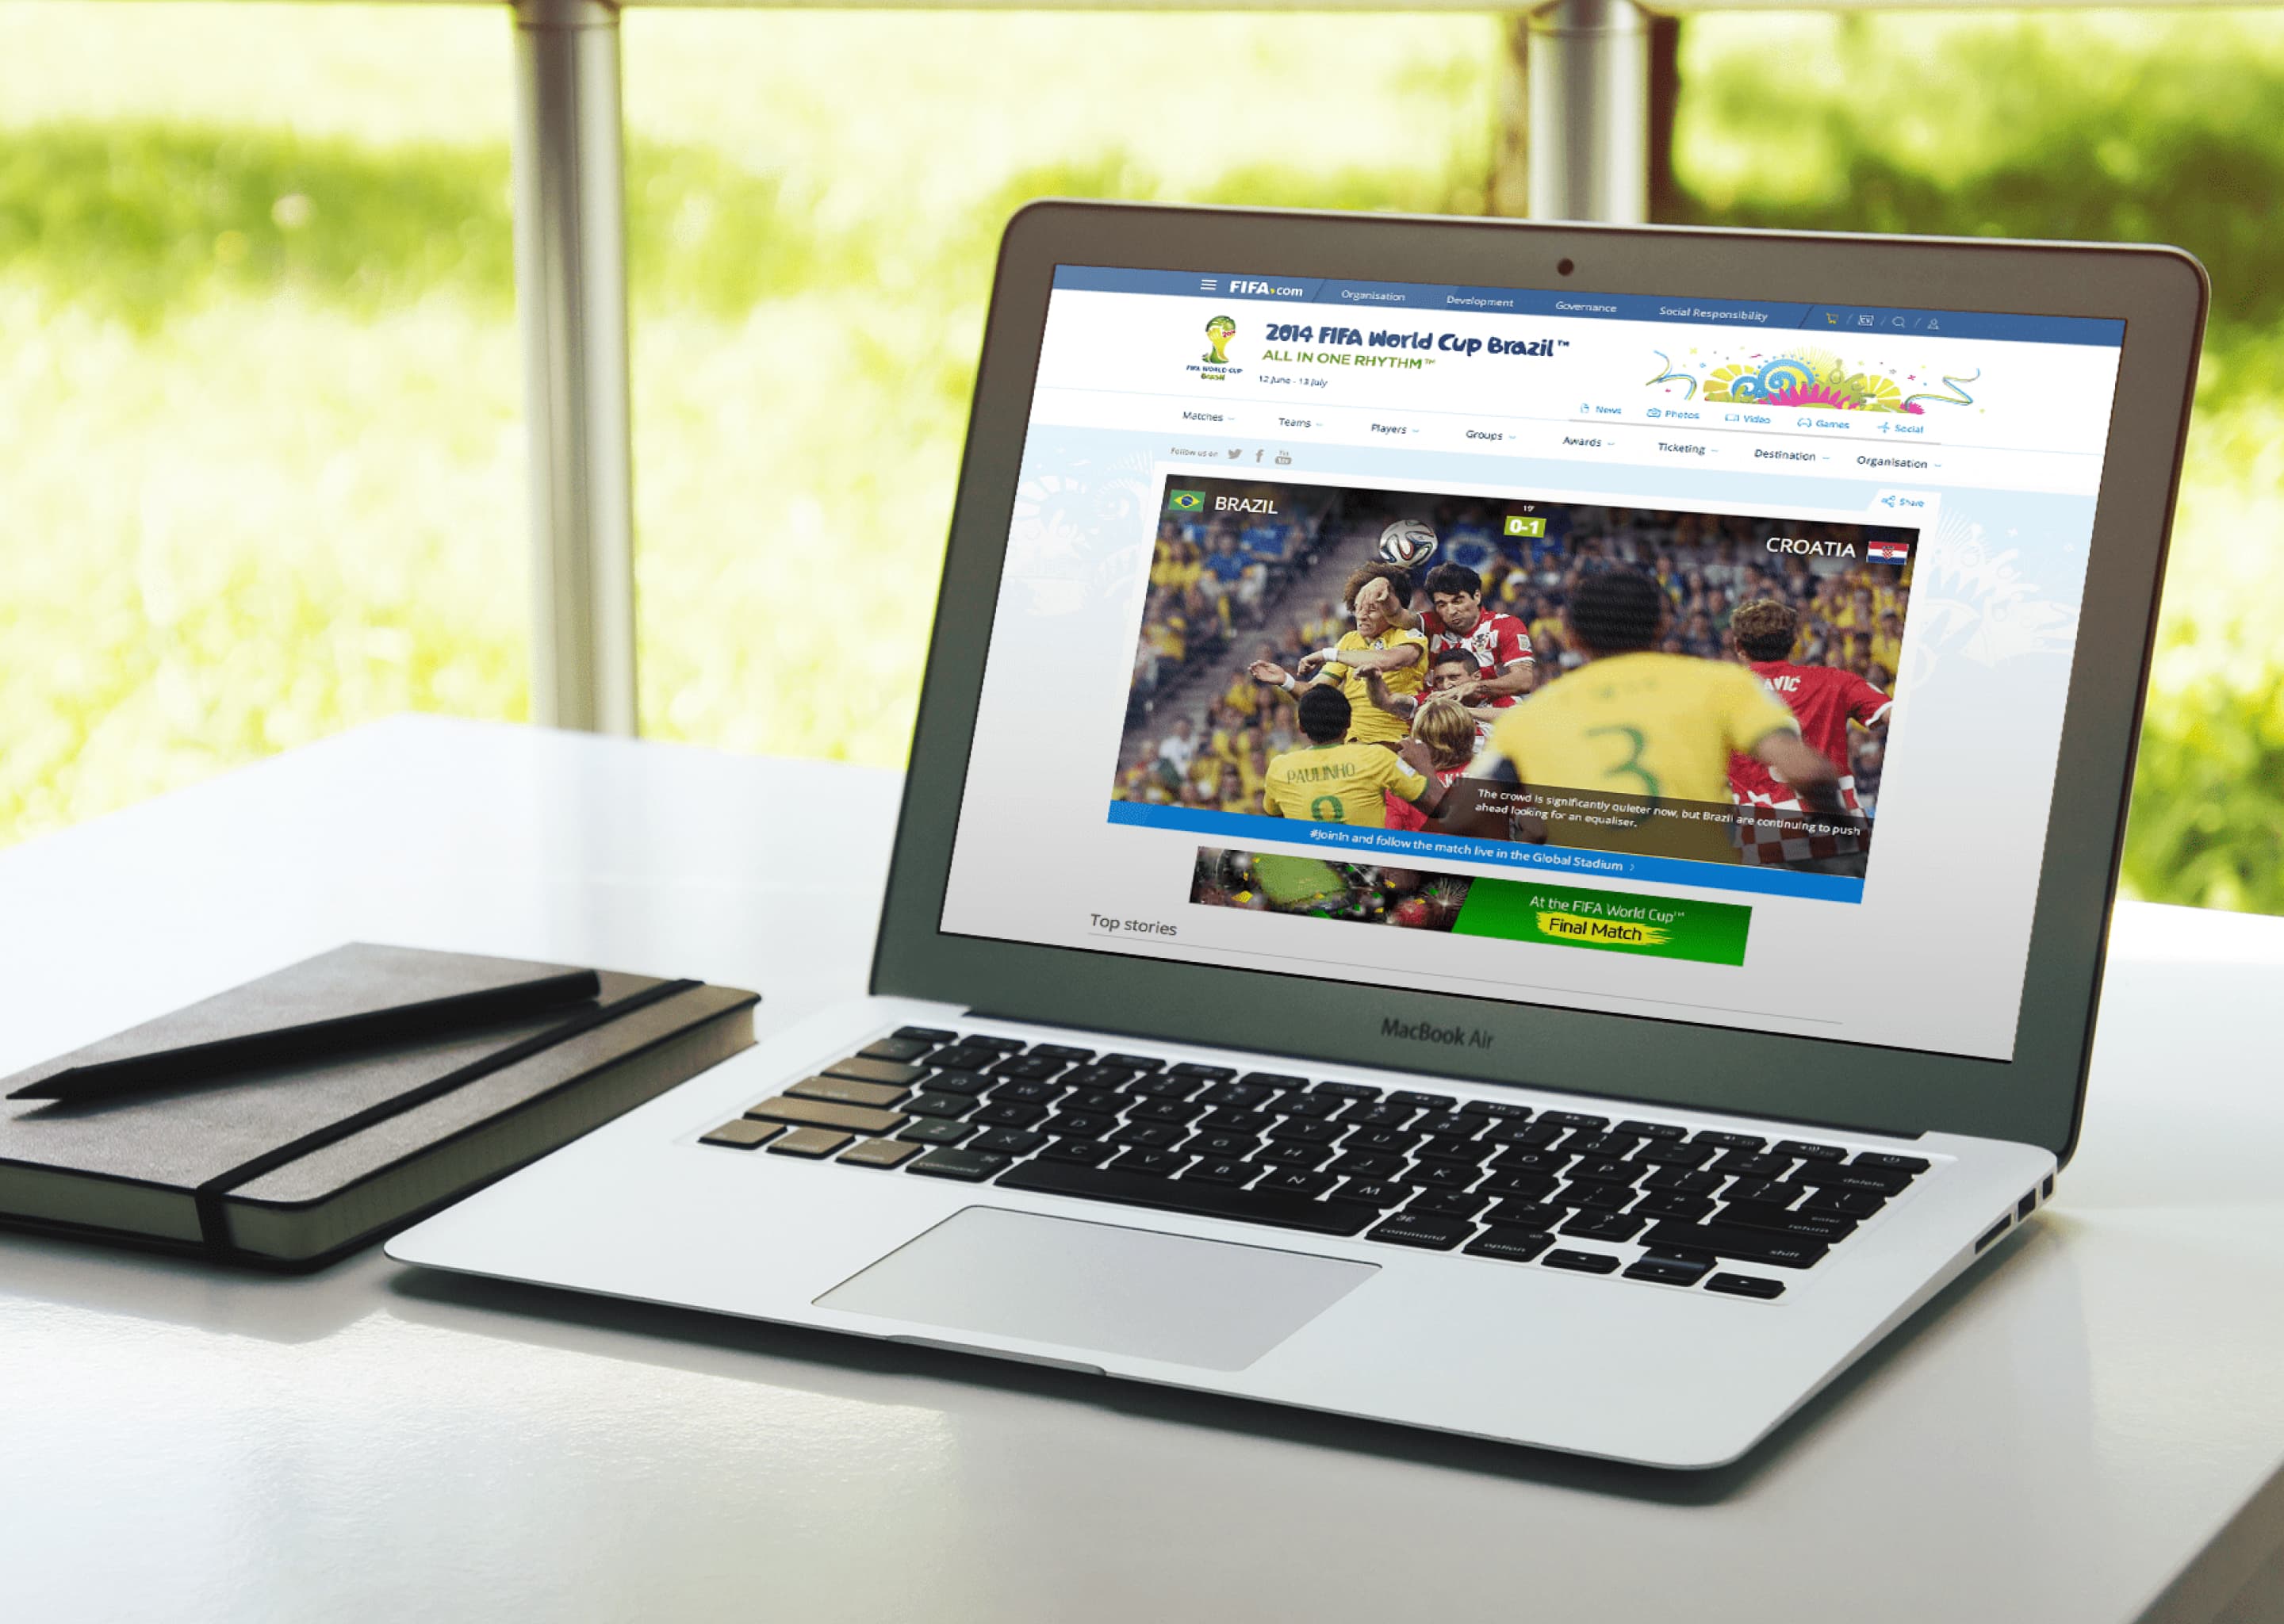 Image showing a mockup of the responsive website designed for the FIFA World Cup 2014